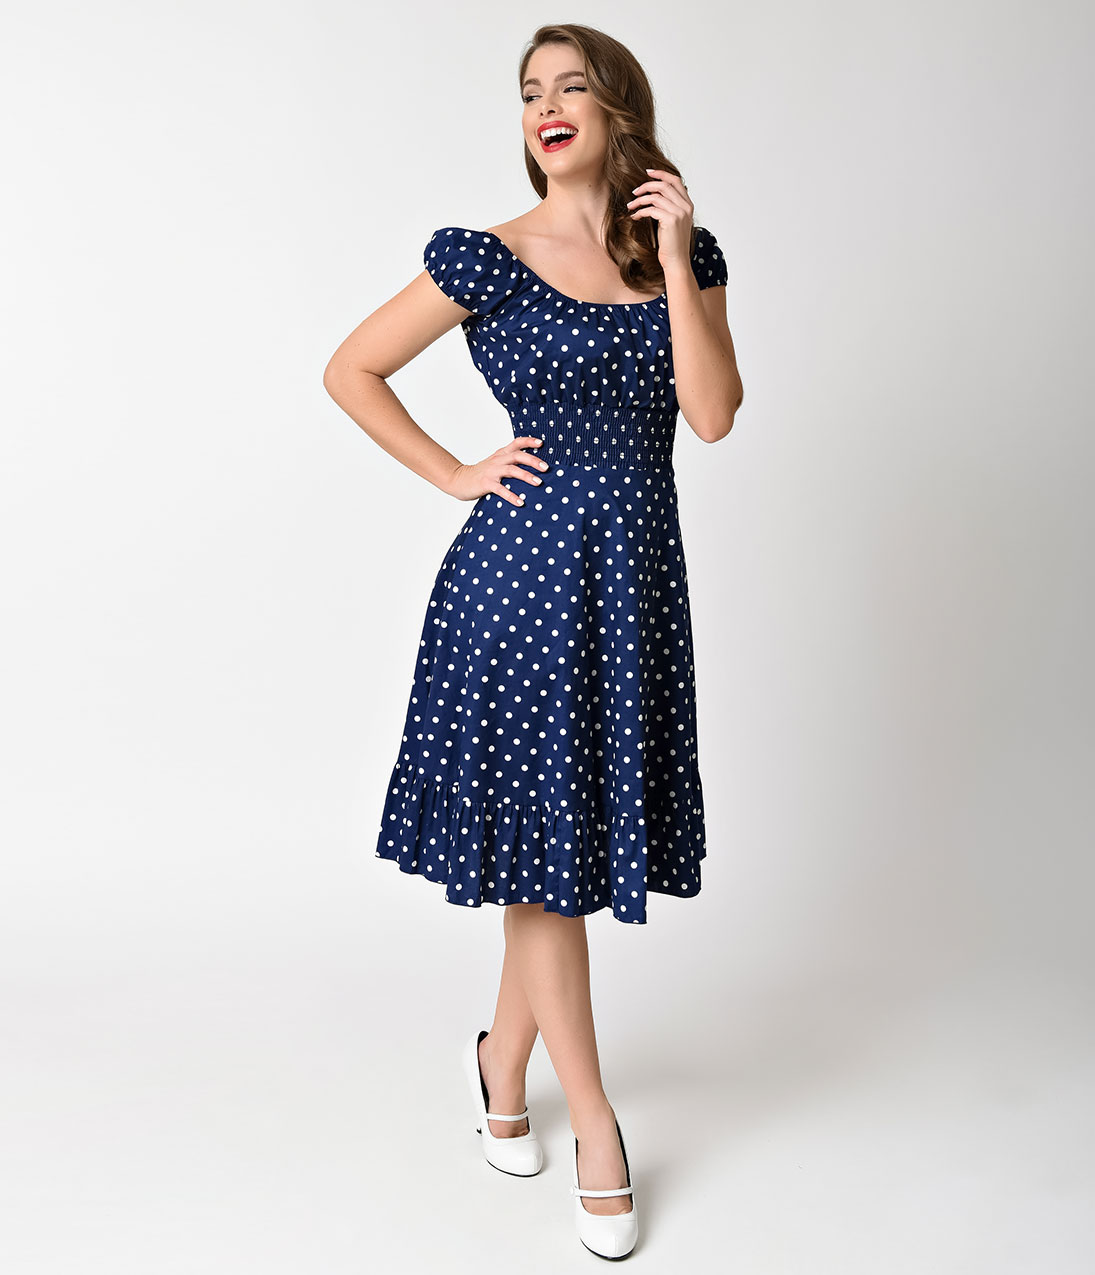 marvellous 1940s style dresses 99 about remodel dresses for teens with 1940s  style dresses CPITOWF